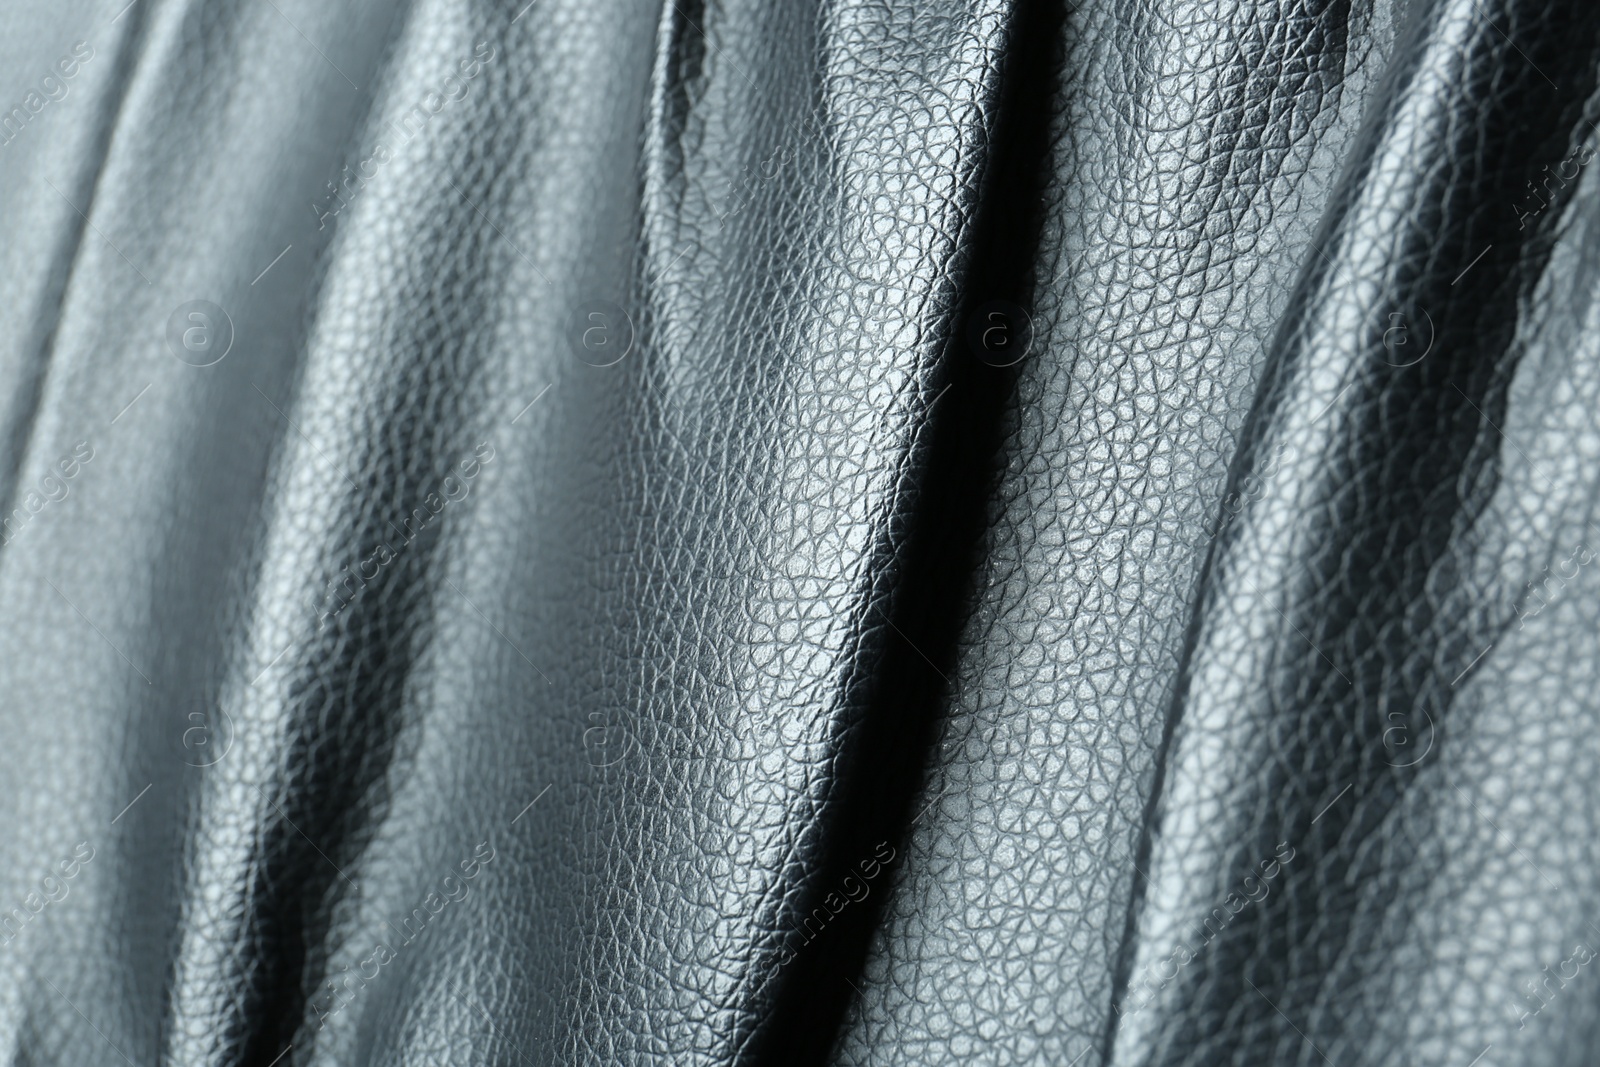 Photo of Black natural leather as background, closeup view